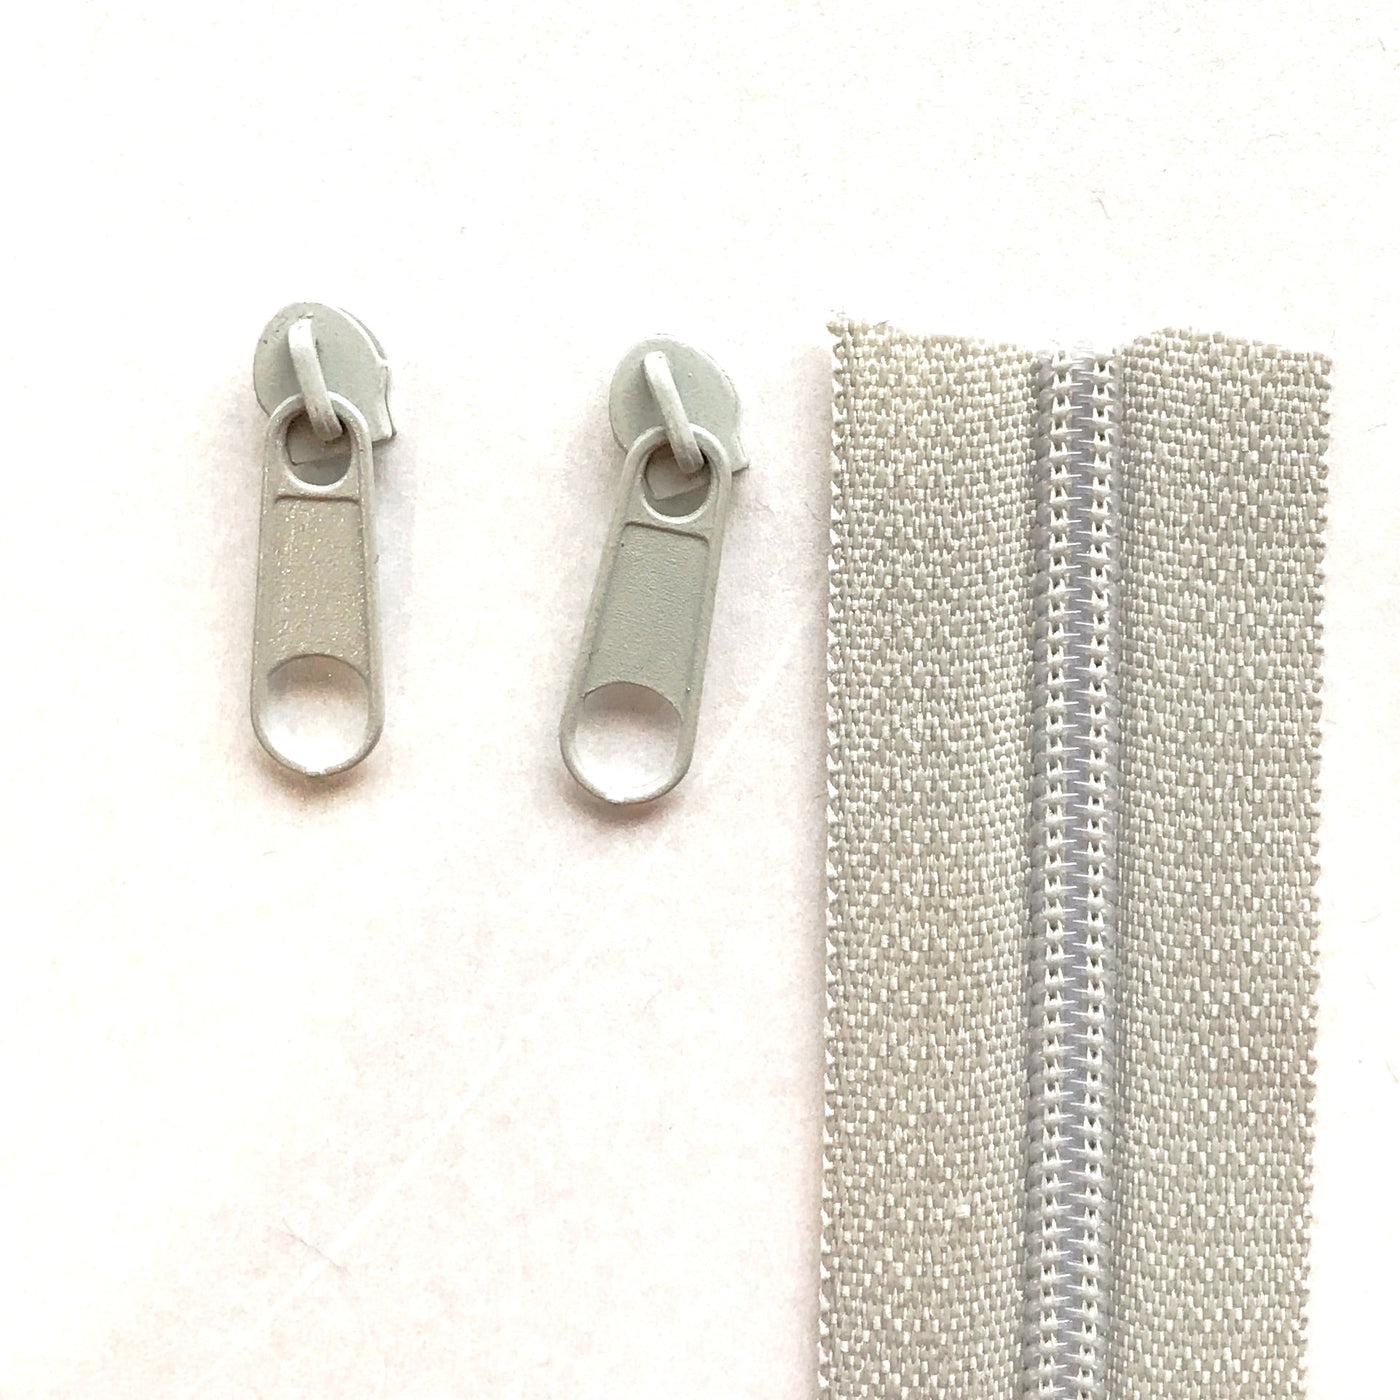 Light grey continuous long chain zipper tape and sliders